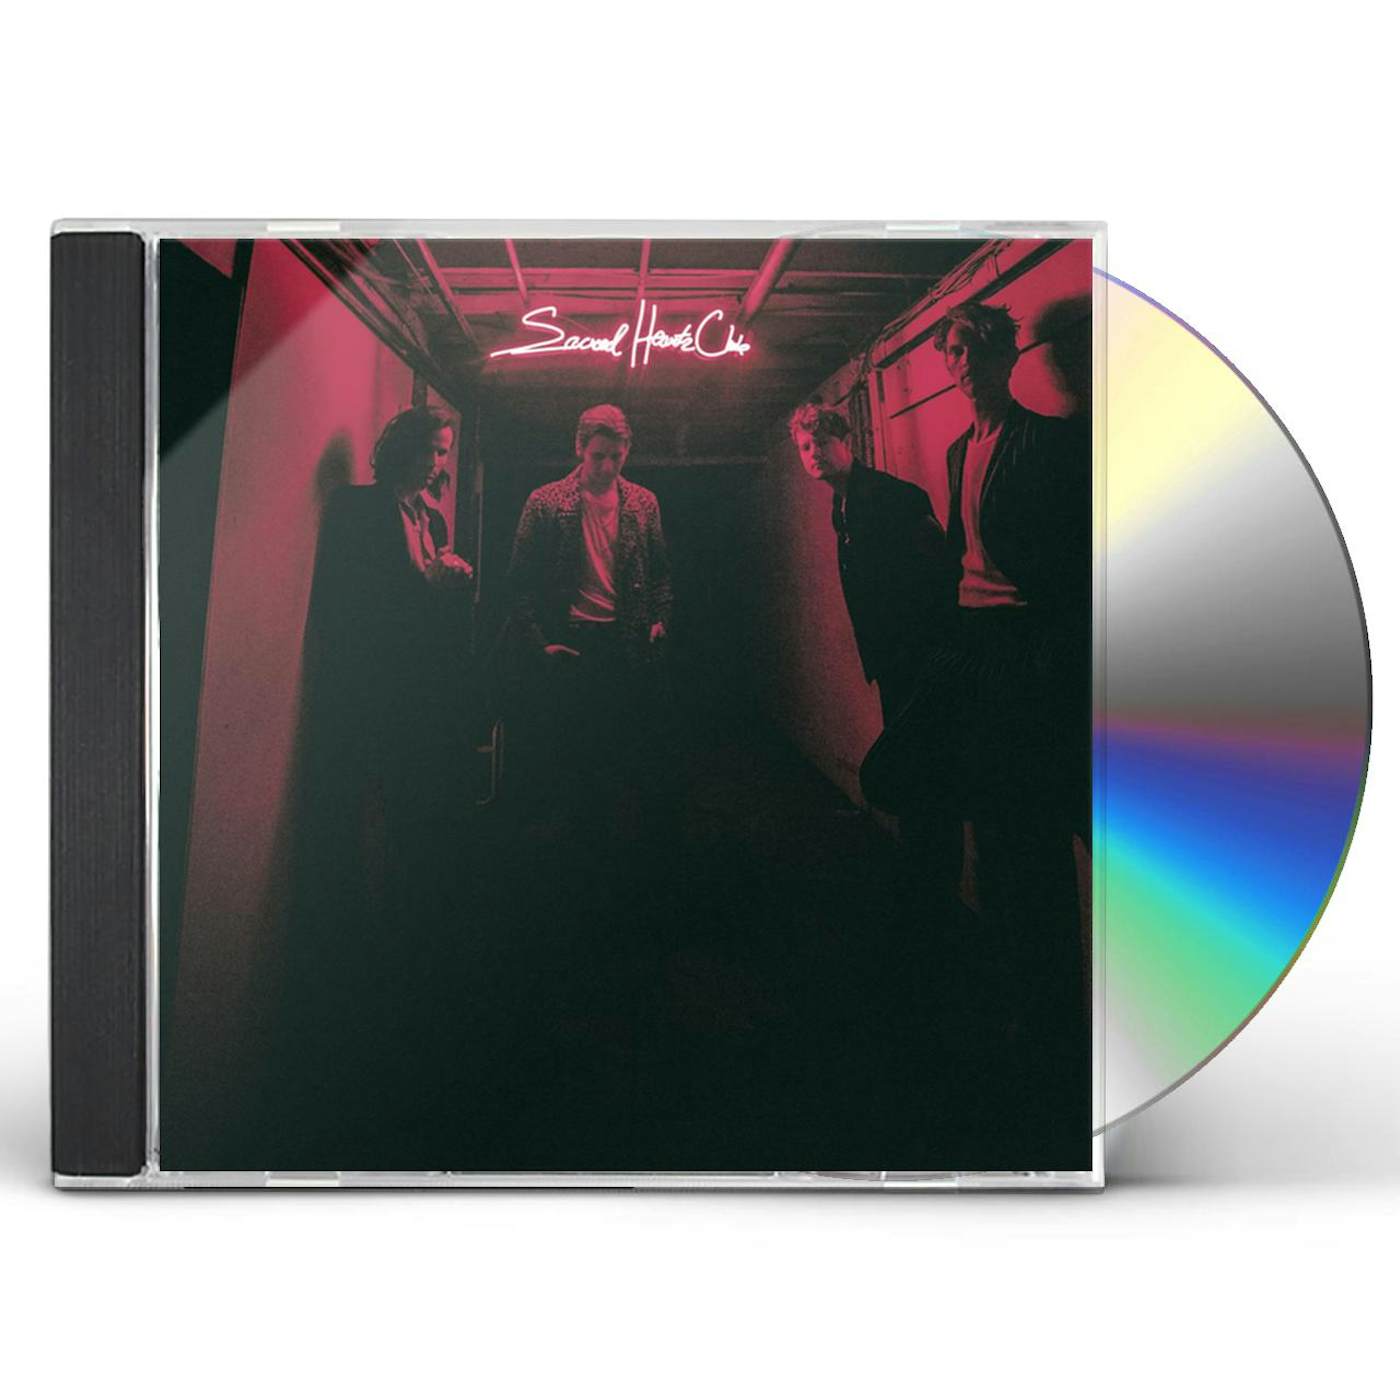 Foster The People Sacred Hearts Club CD